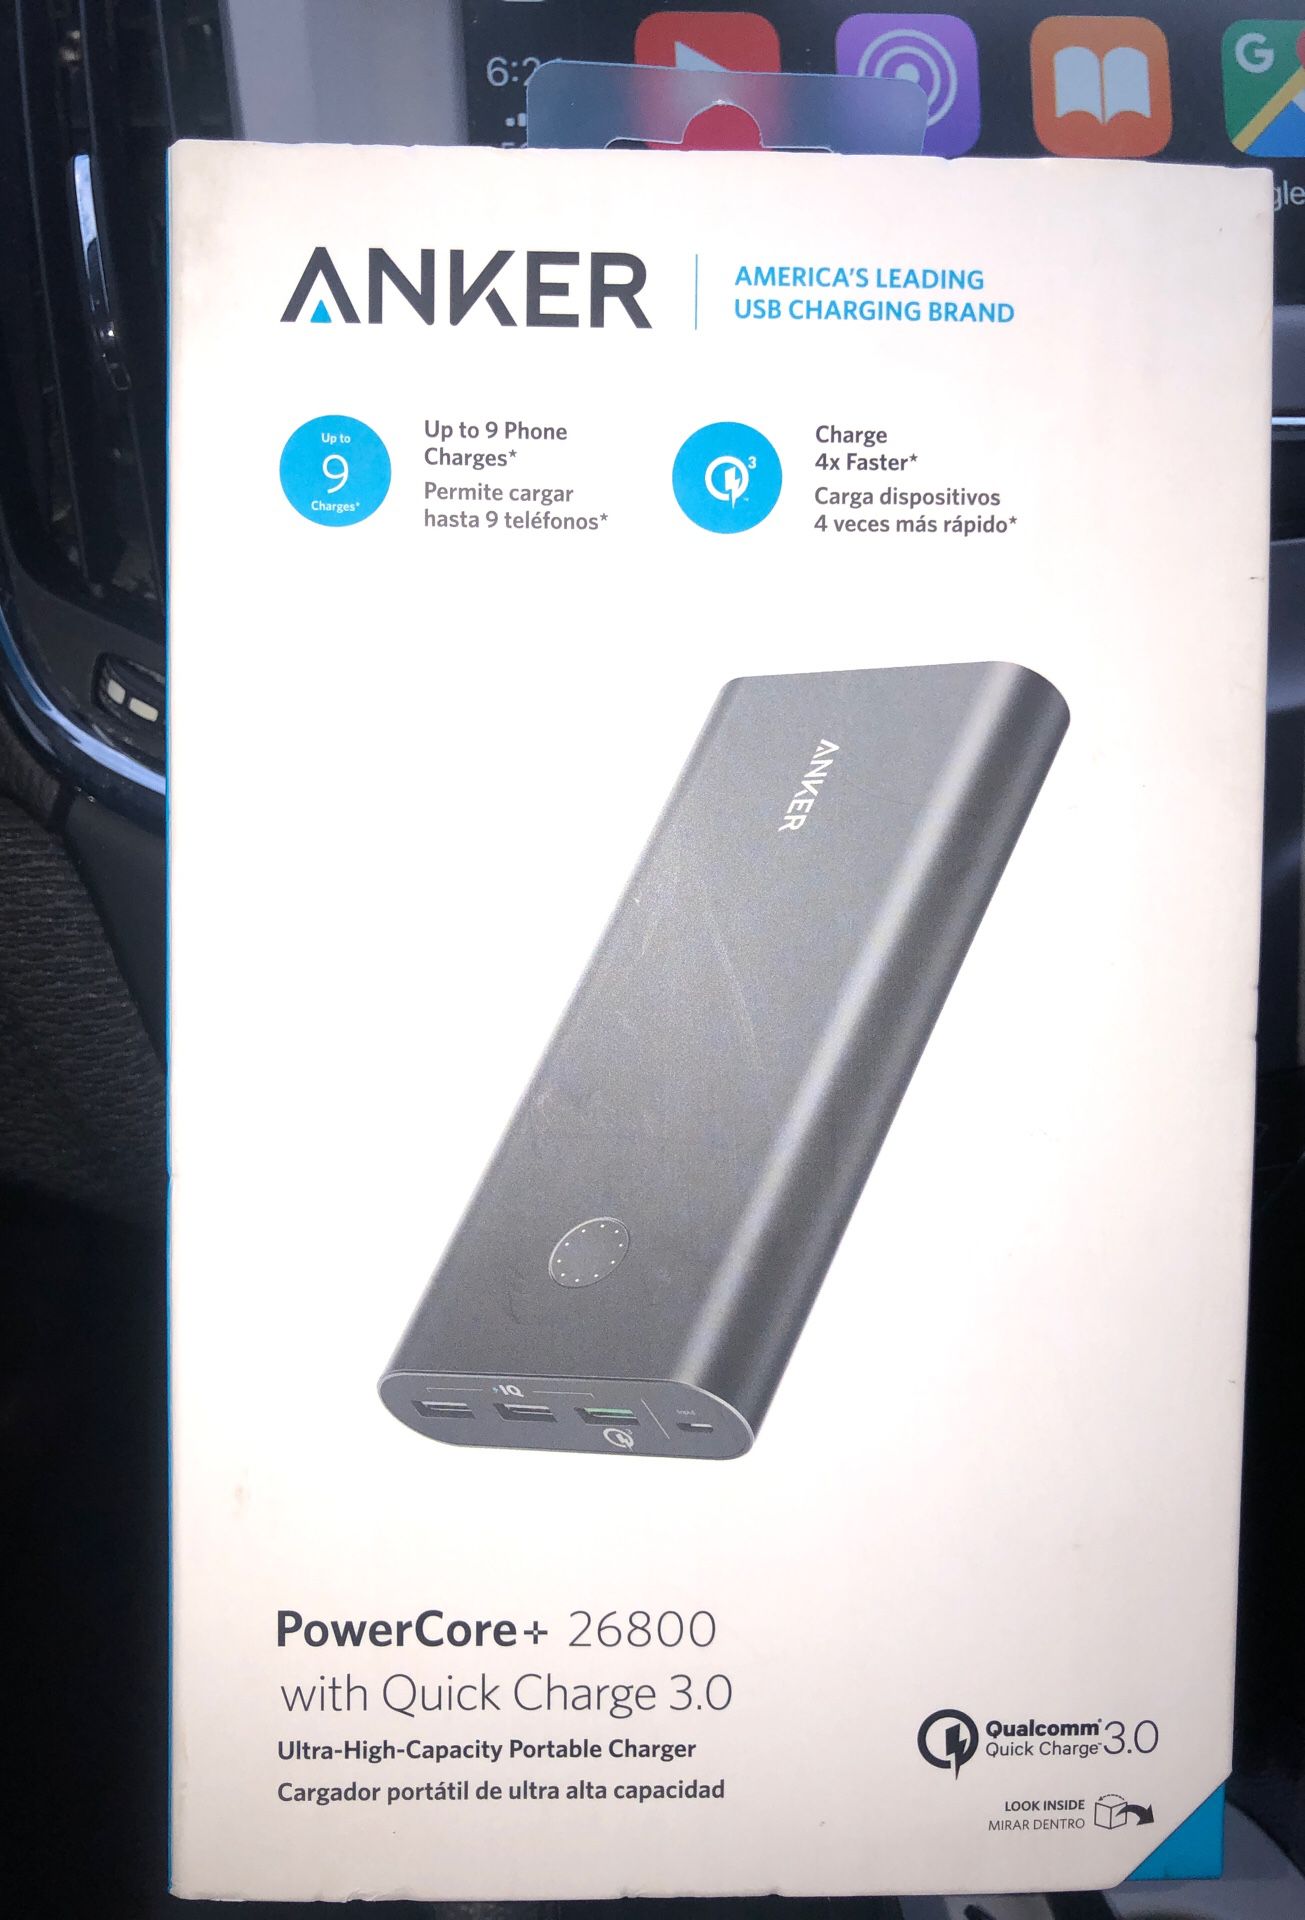 Anker PowerCore+ 26800 Portable Charger & Power Bank - Unopened!